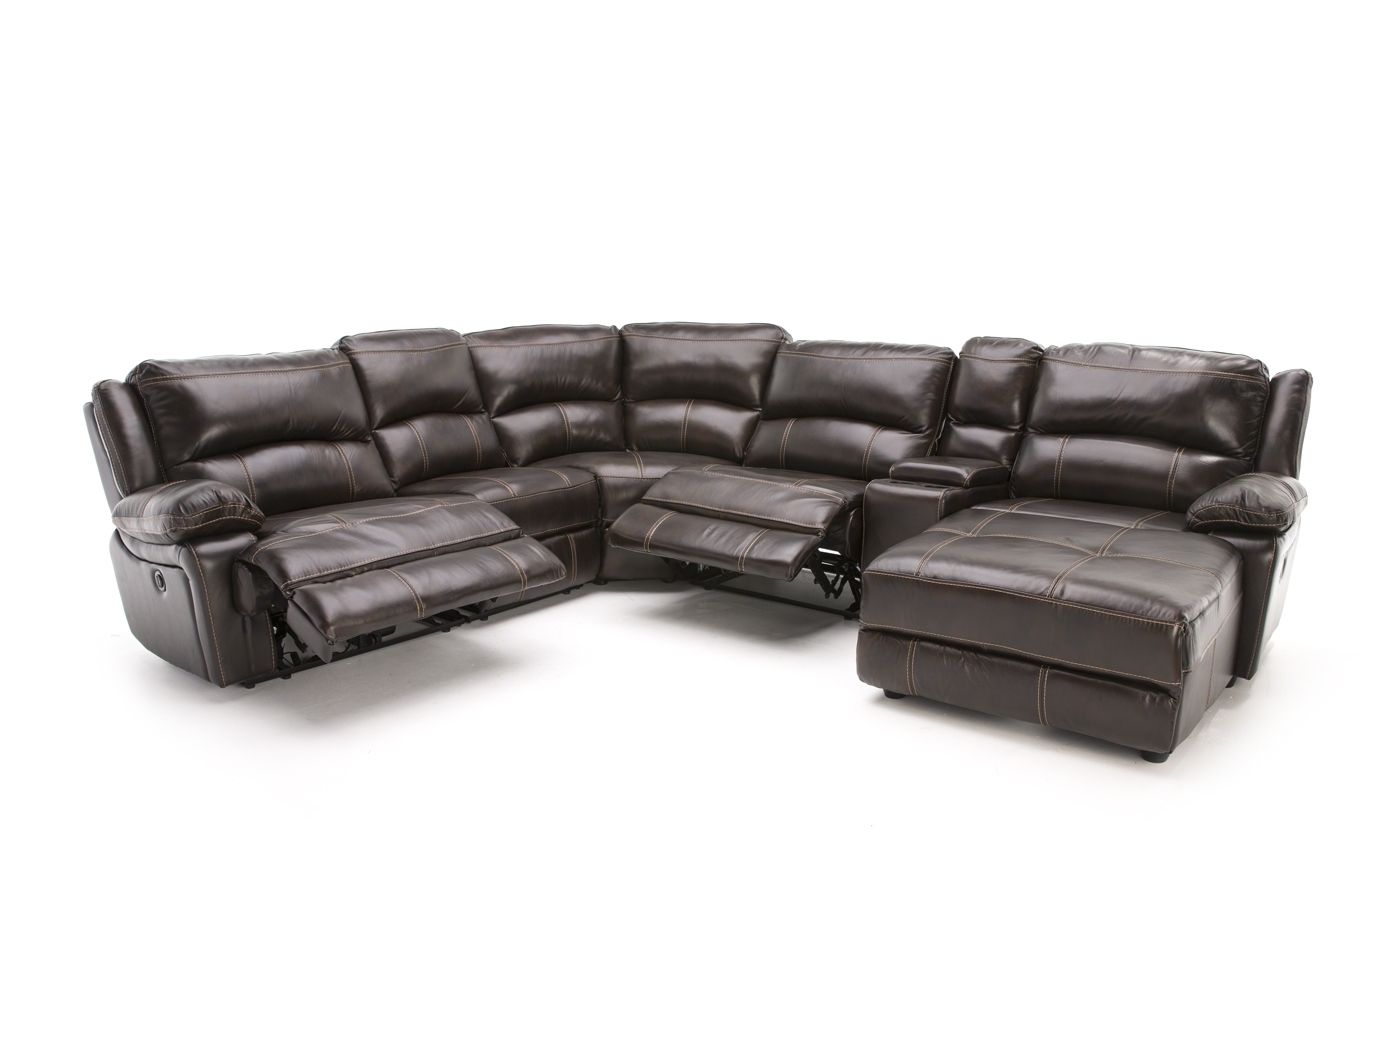 Living Room – Sectionals | Steinhafels In Marissa Ii 3 Piece Sectionals (View 7 of 30)